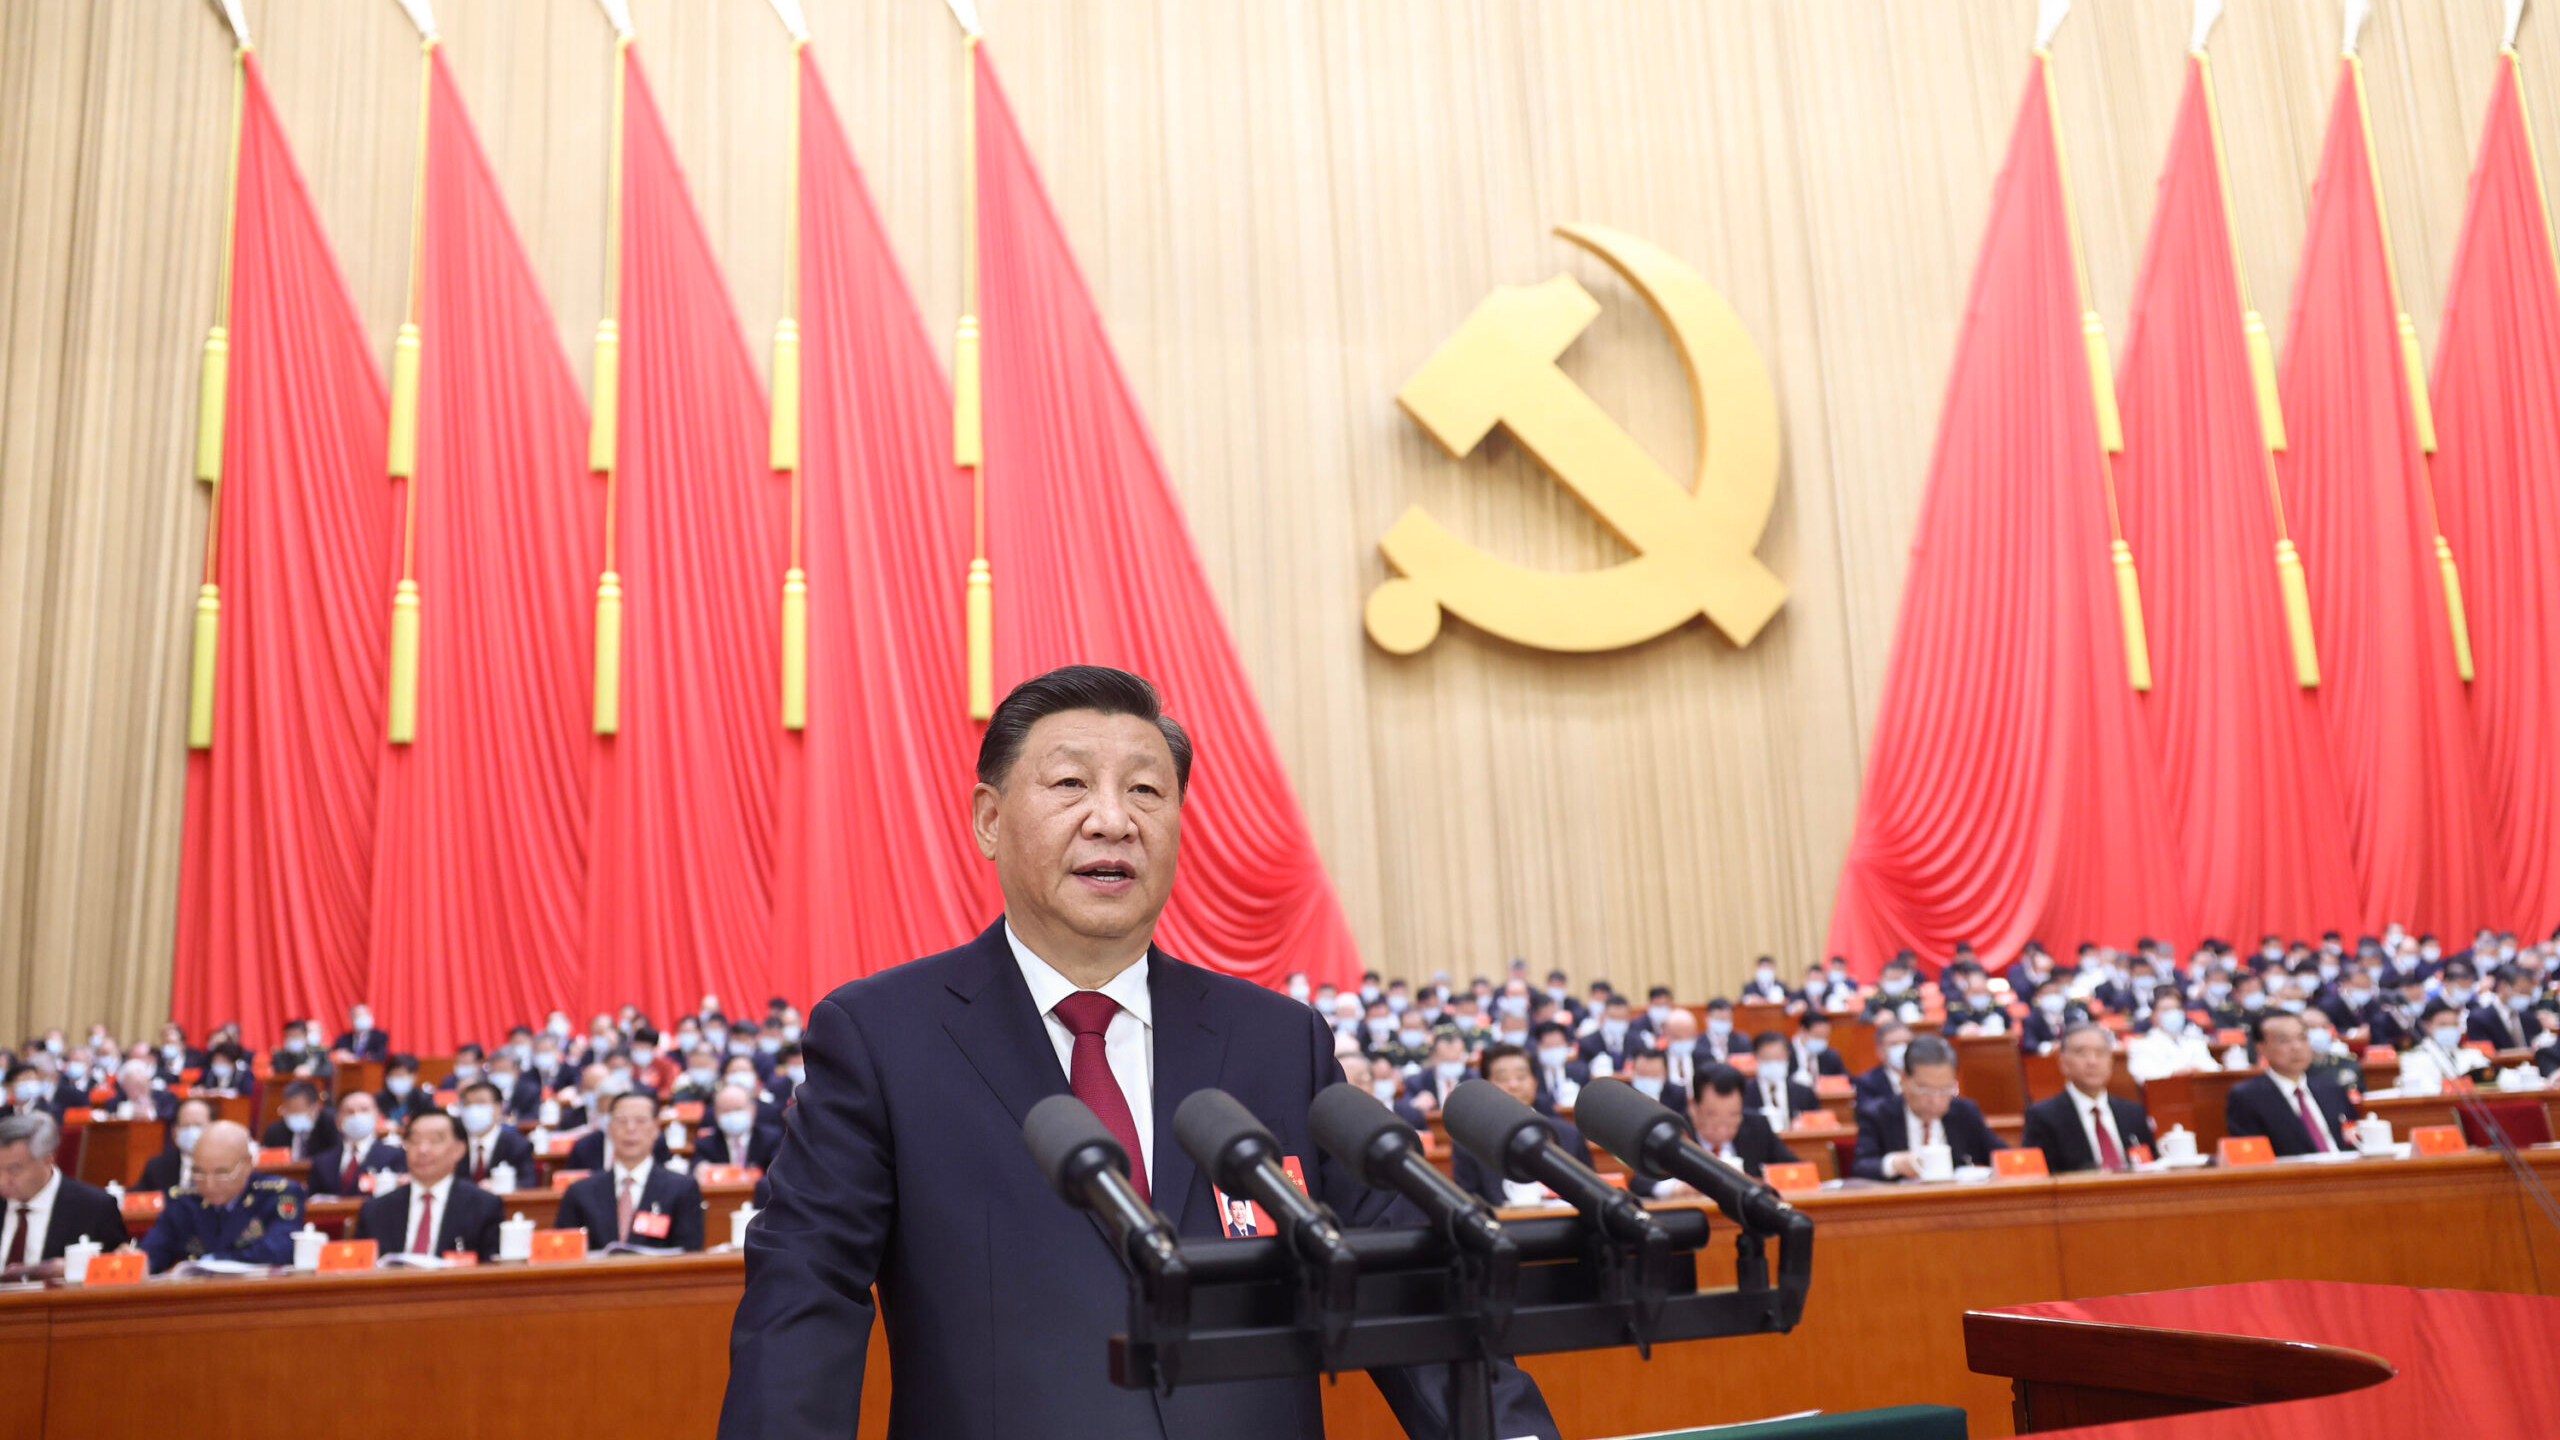 Xi Jinping delivers a report to the 20th National Congress of the Communist Party of China (CPC) on behalf of the 19th CPC Central Committee at the Great Hall of the People in Beijing, capital of China, October 16, 2022. /Xinhua